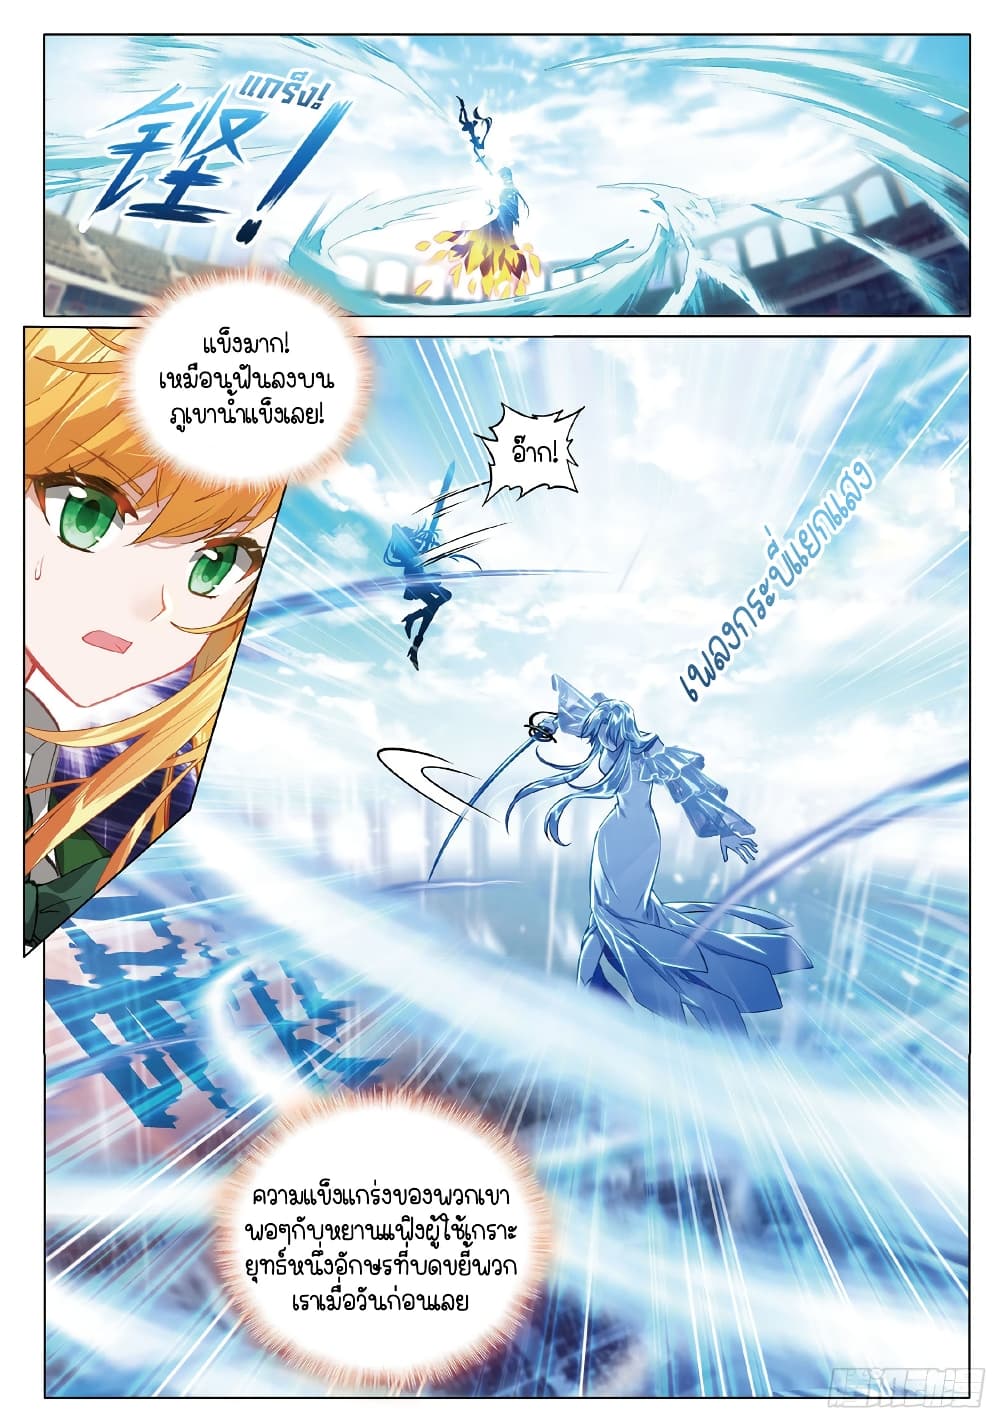 Douluo Dalu 3: The Legend of the Dragon King 269-เทพมังกรแปรฝัน